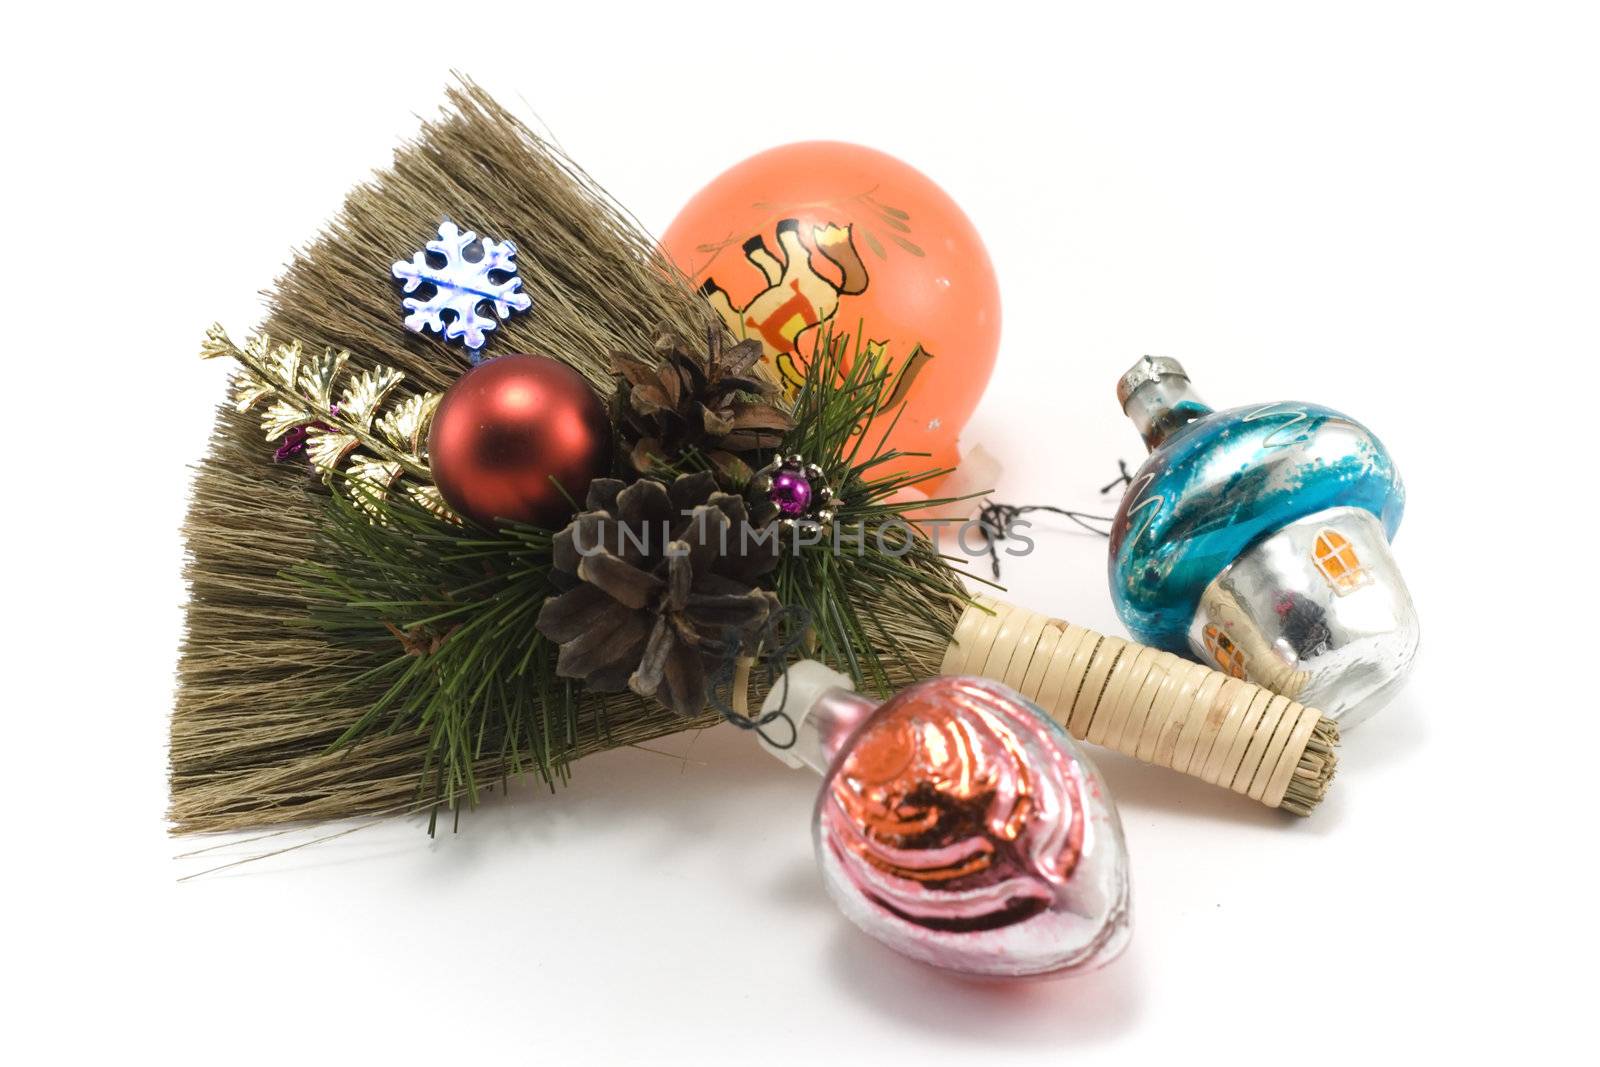 Cristmas, besom, embellishment for ated insulated on white background